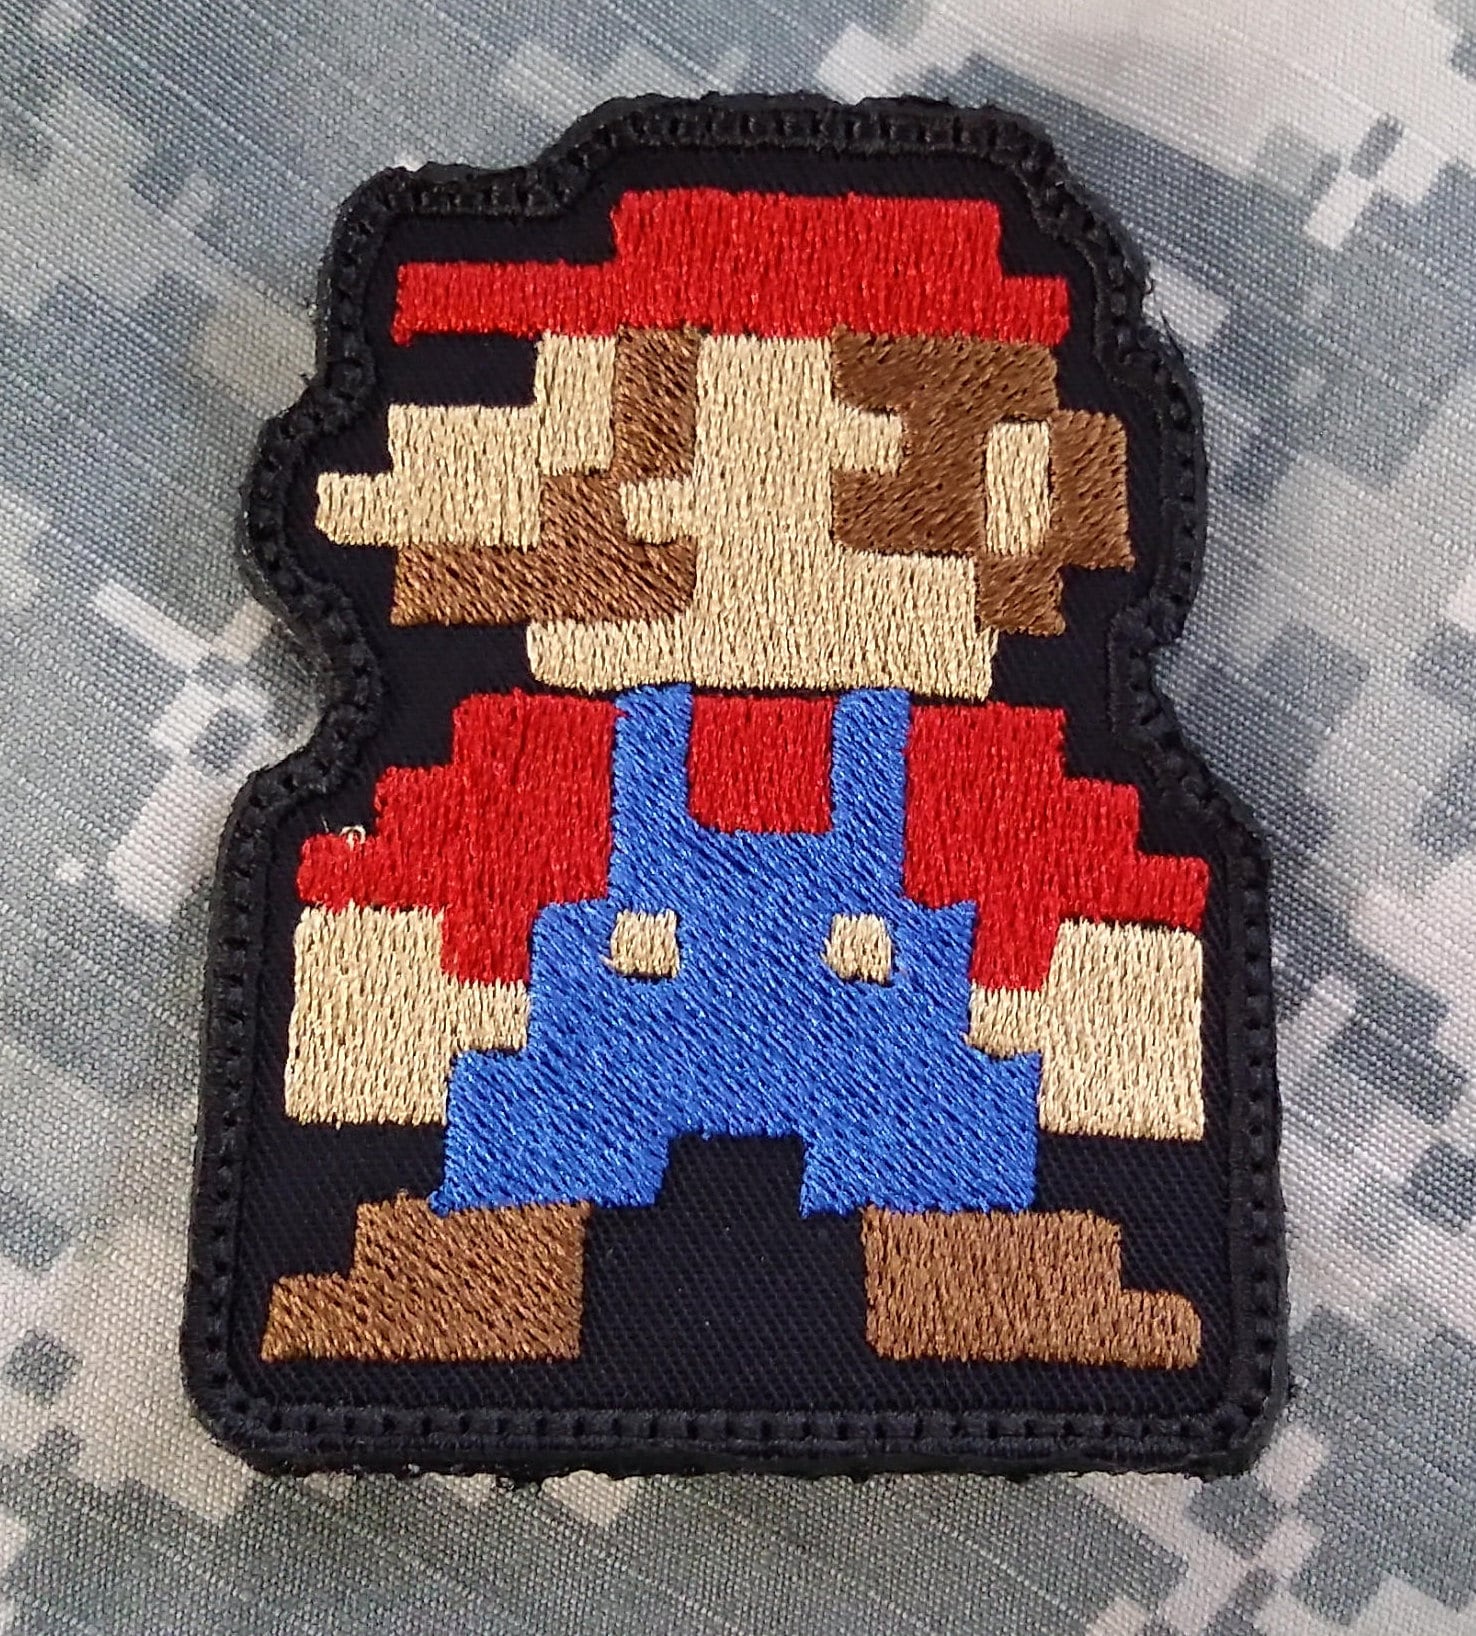  Sets of 17pcs Mario and Luigi Mushroom Iron on Patches  Embroidered Motif Applique Decoration Sew On Patches Custom Patches for DIY  Jeans,Jacket,Kid's Clothing, Shoes, Arts Craft (Sets of 17Pcs) : Arts